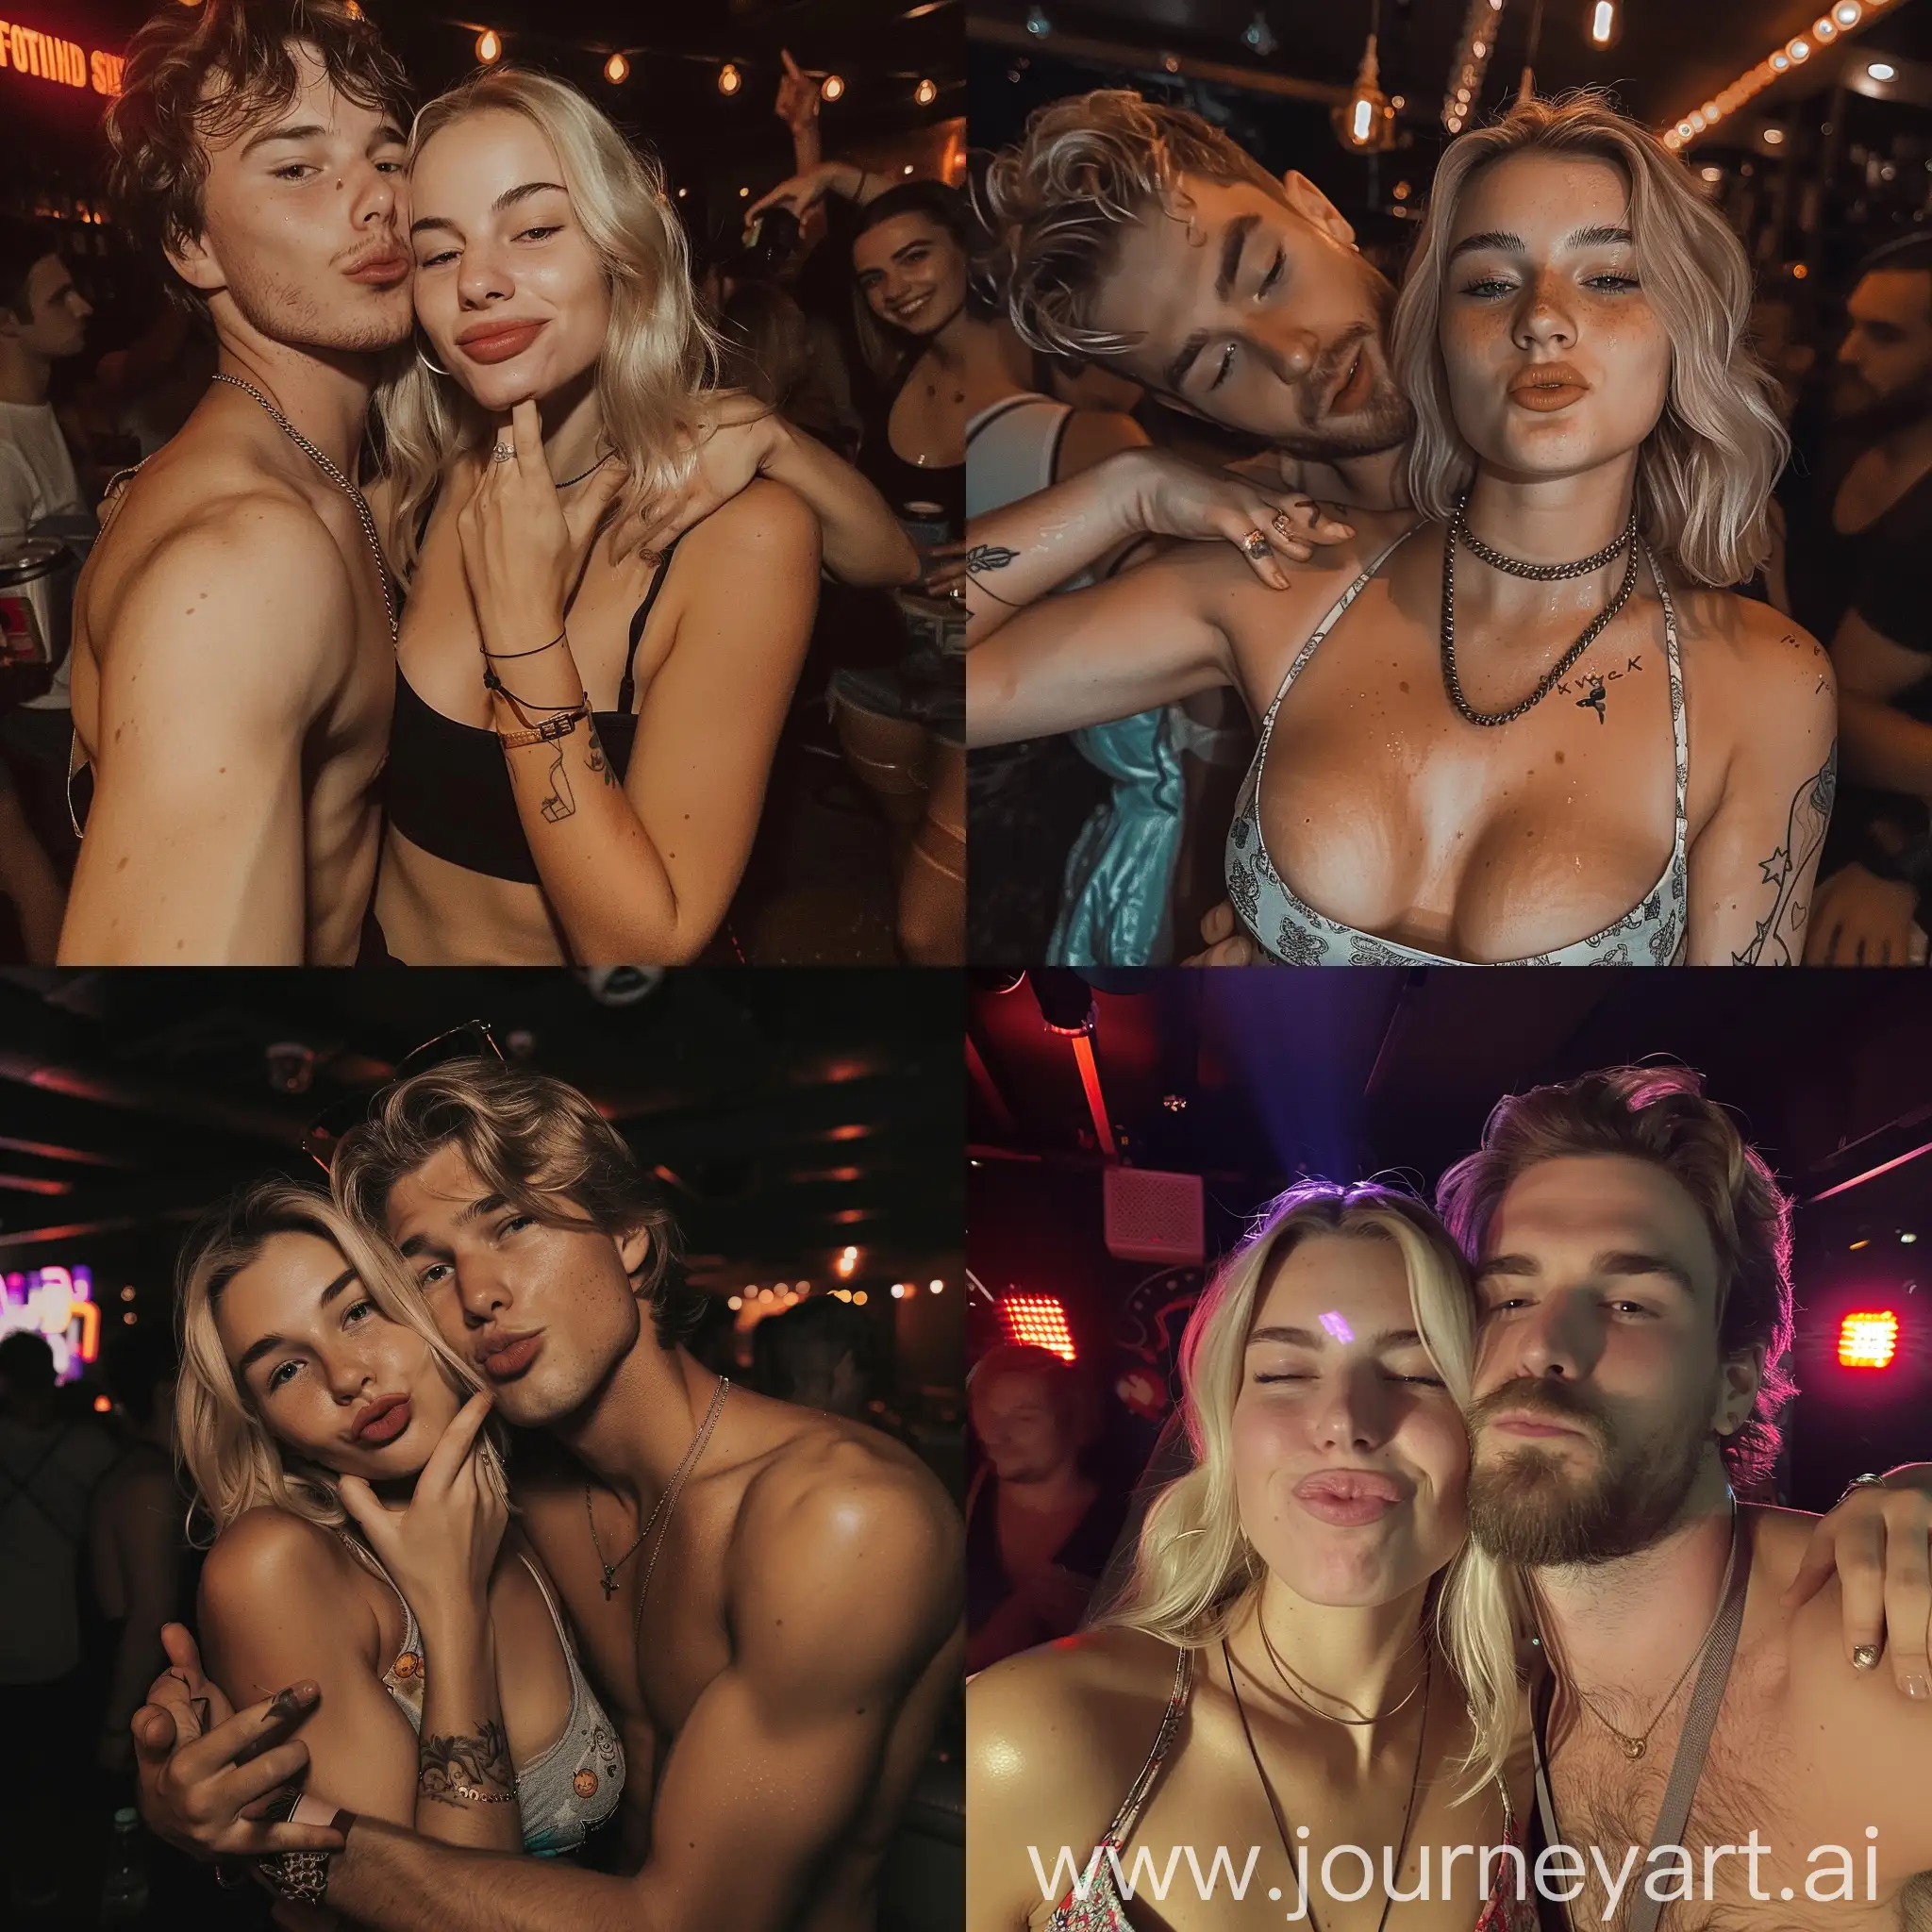 Aesthetic instagram selfie of a blonde woman in a party club crop-top getting hugged by her tall robust partner, she is doing the duck lips pose, her partner is grabbing her neck and smiling, the woman is beautiful and looks typically german , both are looking at the camera, sweaty and flirty